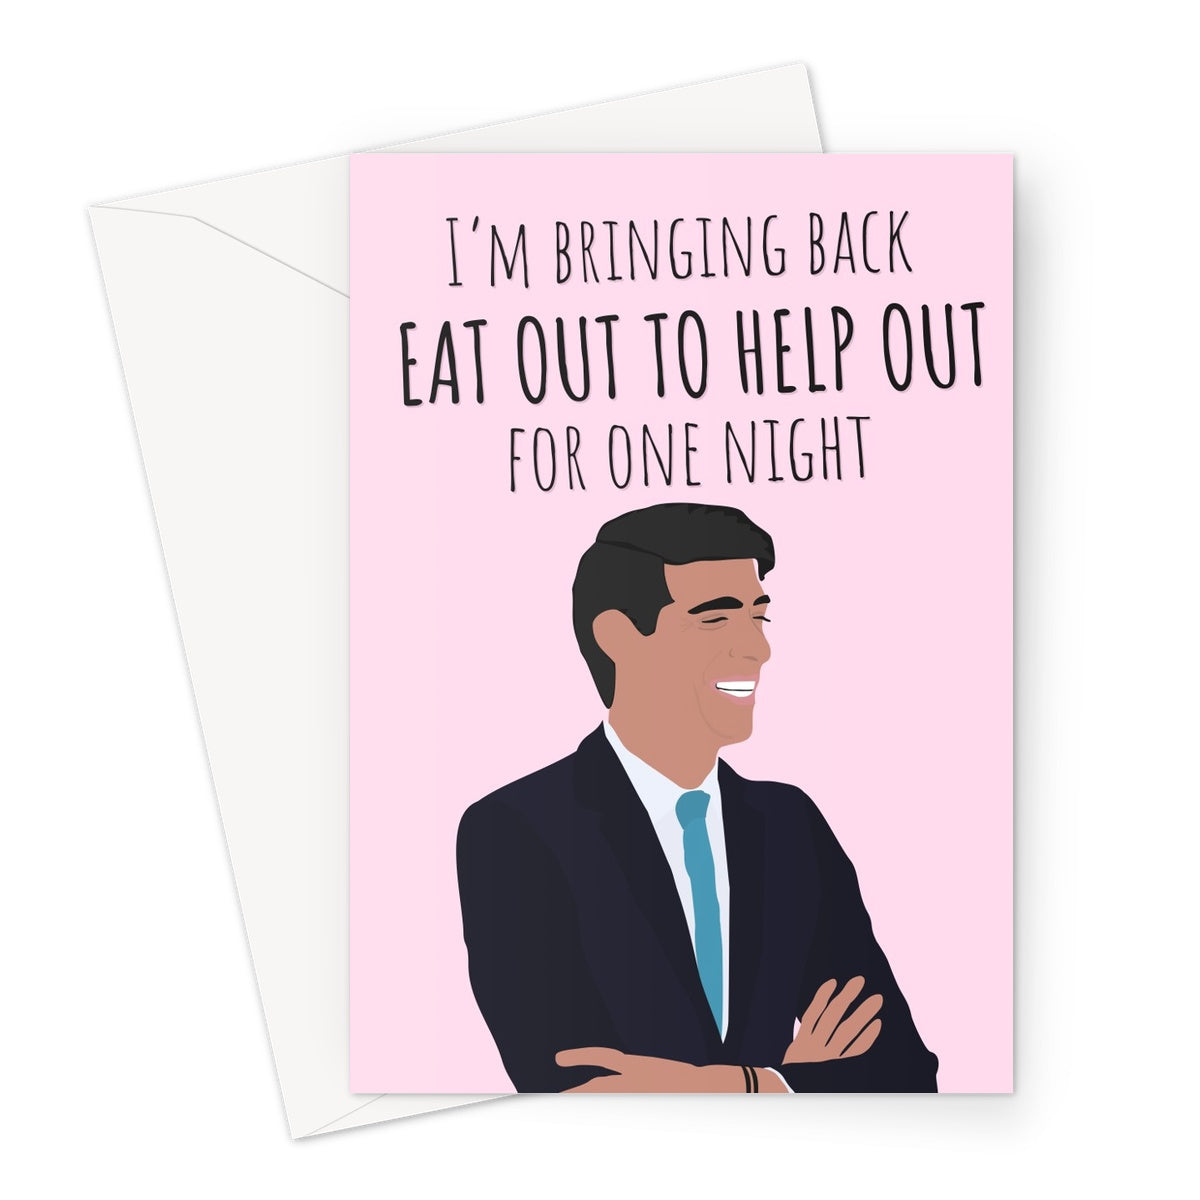 I'm Bringing Back Eat Out to Help Out For One Night Funny Rude Valentine's Day Rishi Sunak Birthday Anniversary Political Fan Tory  Greeting Card